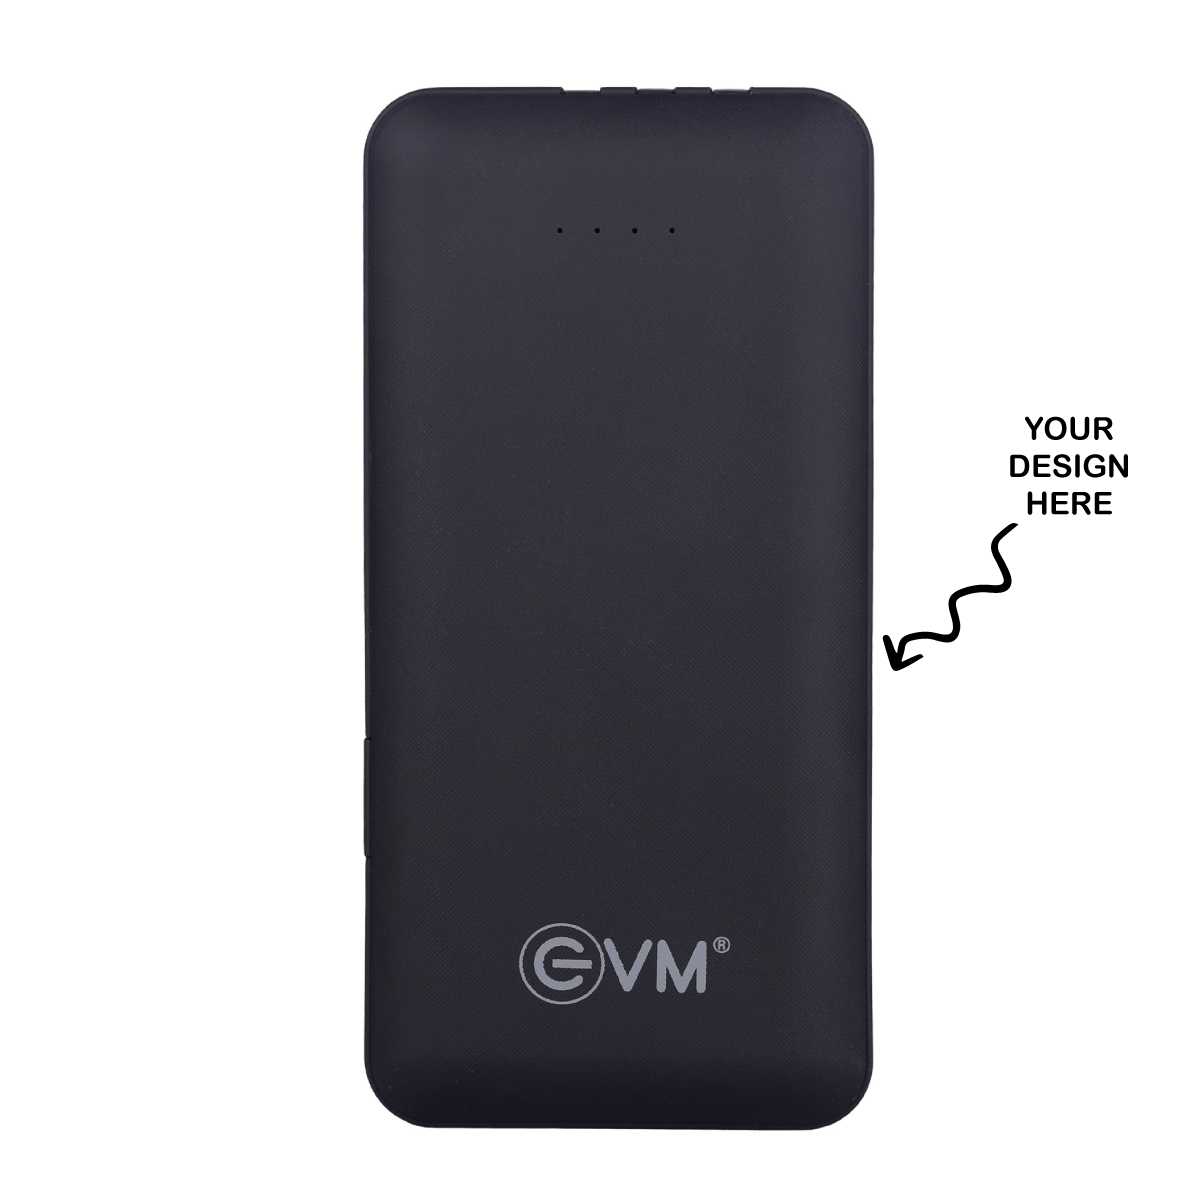 Personalized Black 10000mAh Power Bank - For Corporate Gifting, Event Gifting, Freebies, Promotions - HKP0077